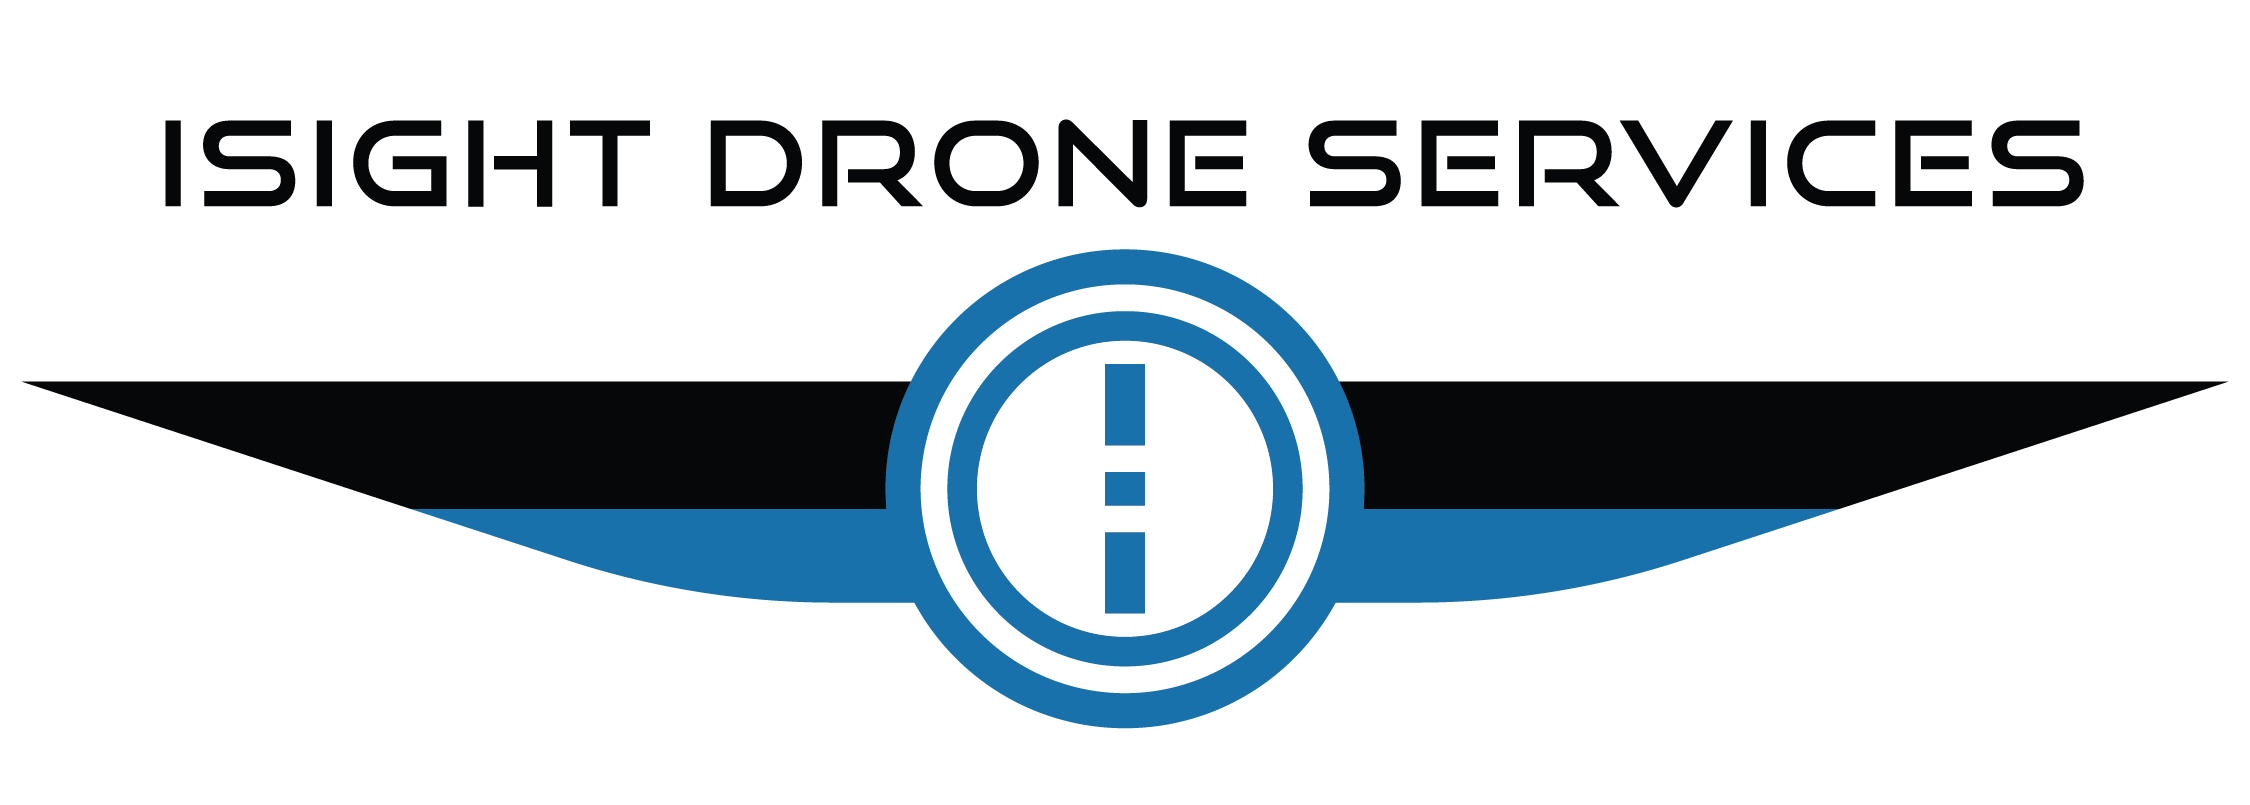 ISIGHT DRONE SERVICES LOGO2 ISight Drone Services Logo